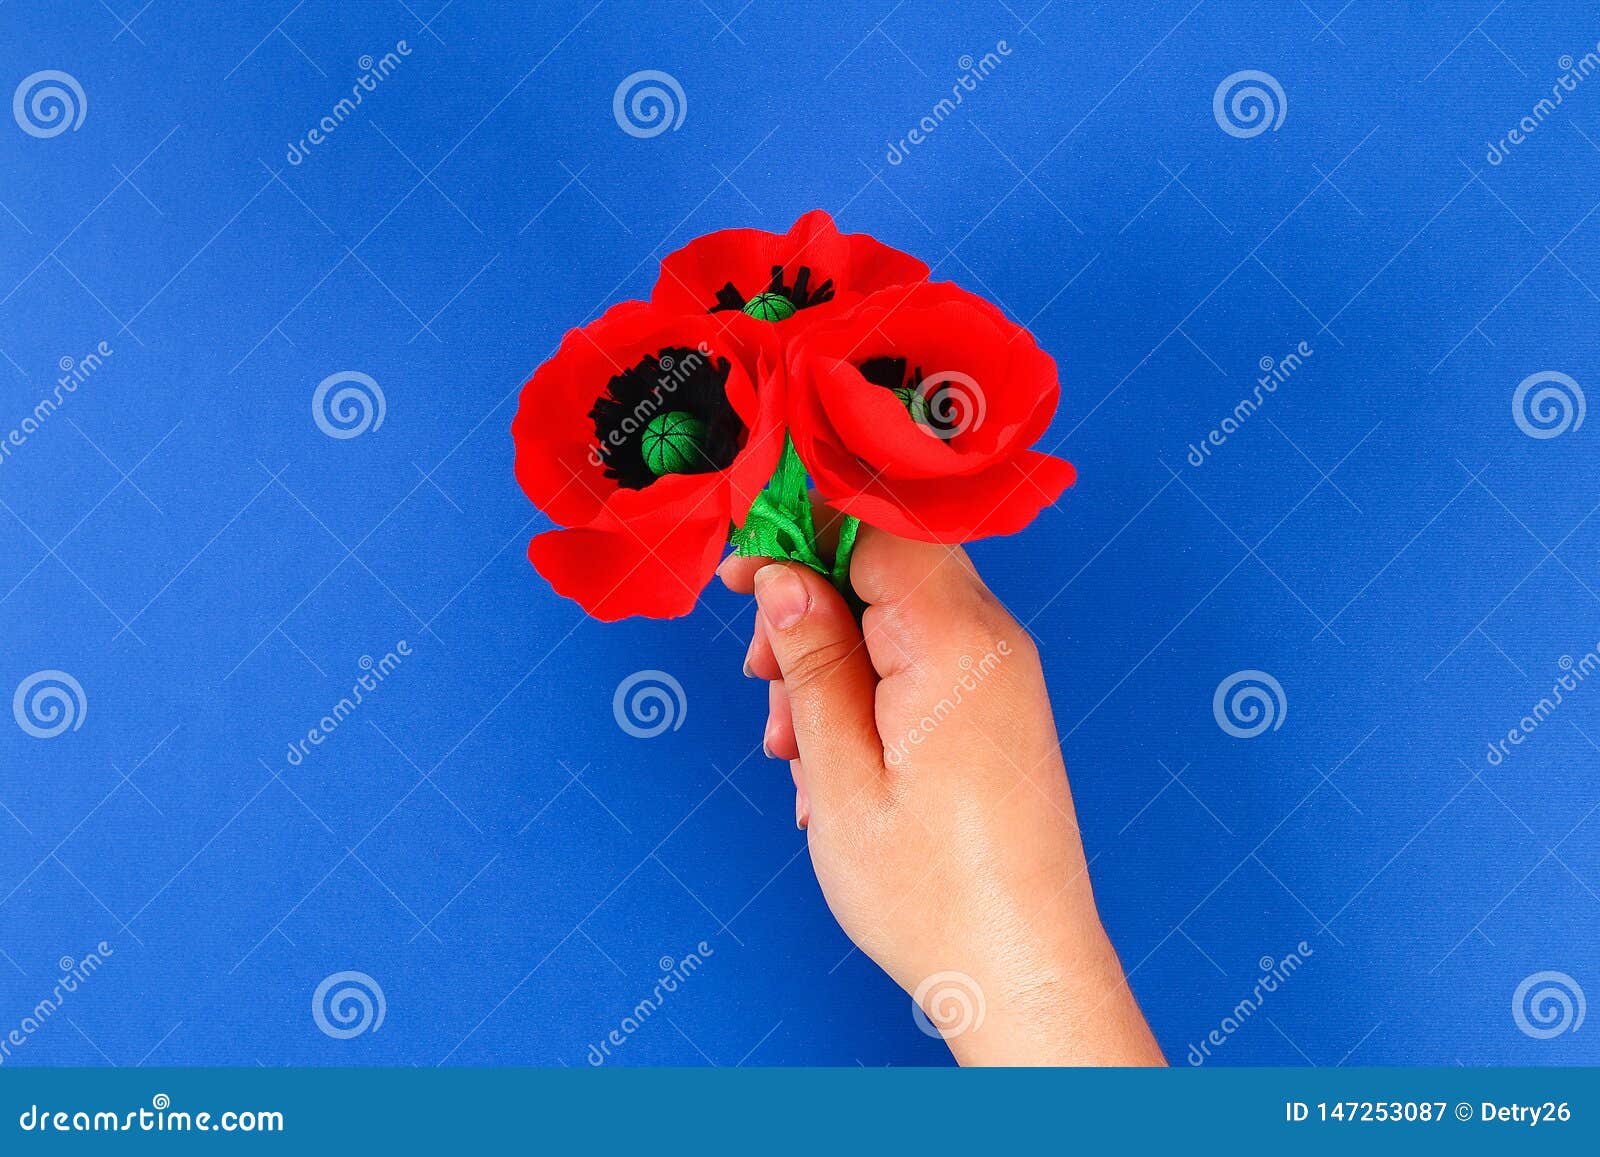 Diy Paper Red Poppy Anzac Day Remembrance Remember Memorial Day Crepe Paper On Blue Background Stock Image Image Of Blue Hand